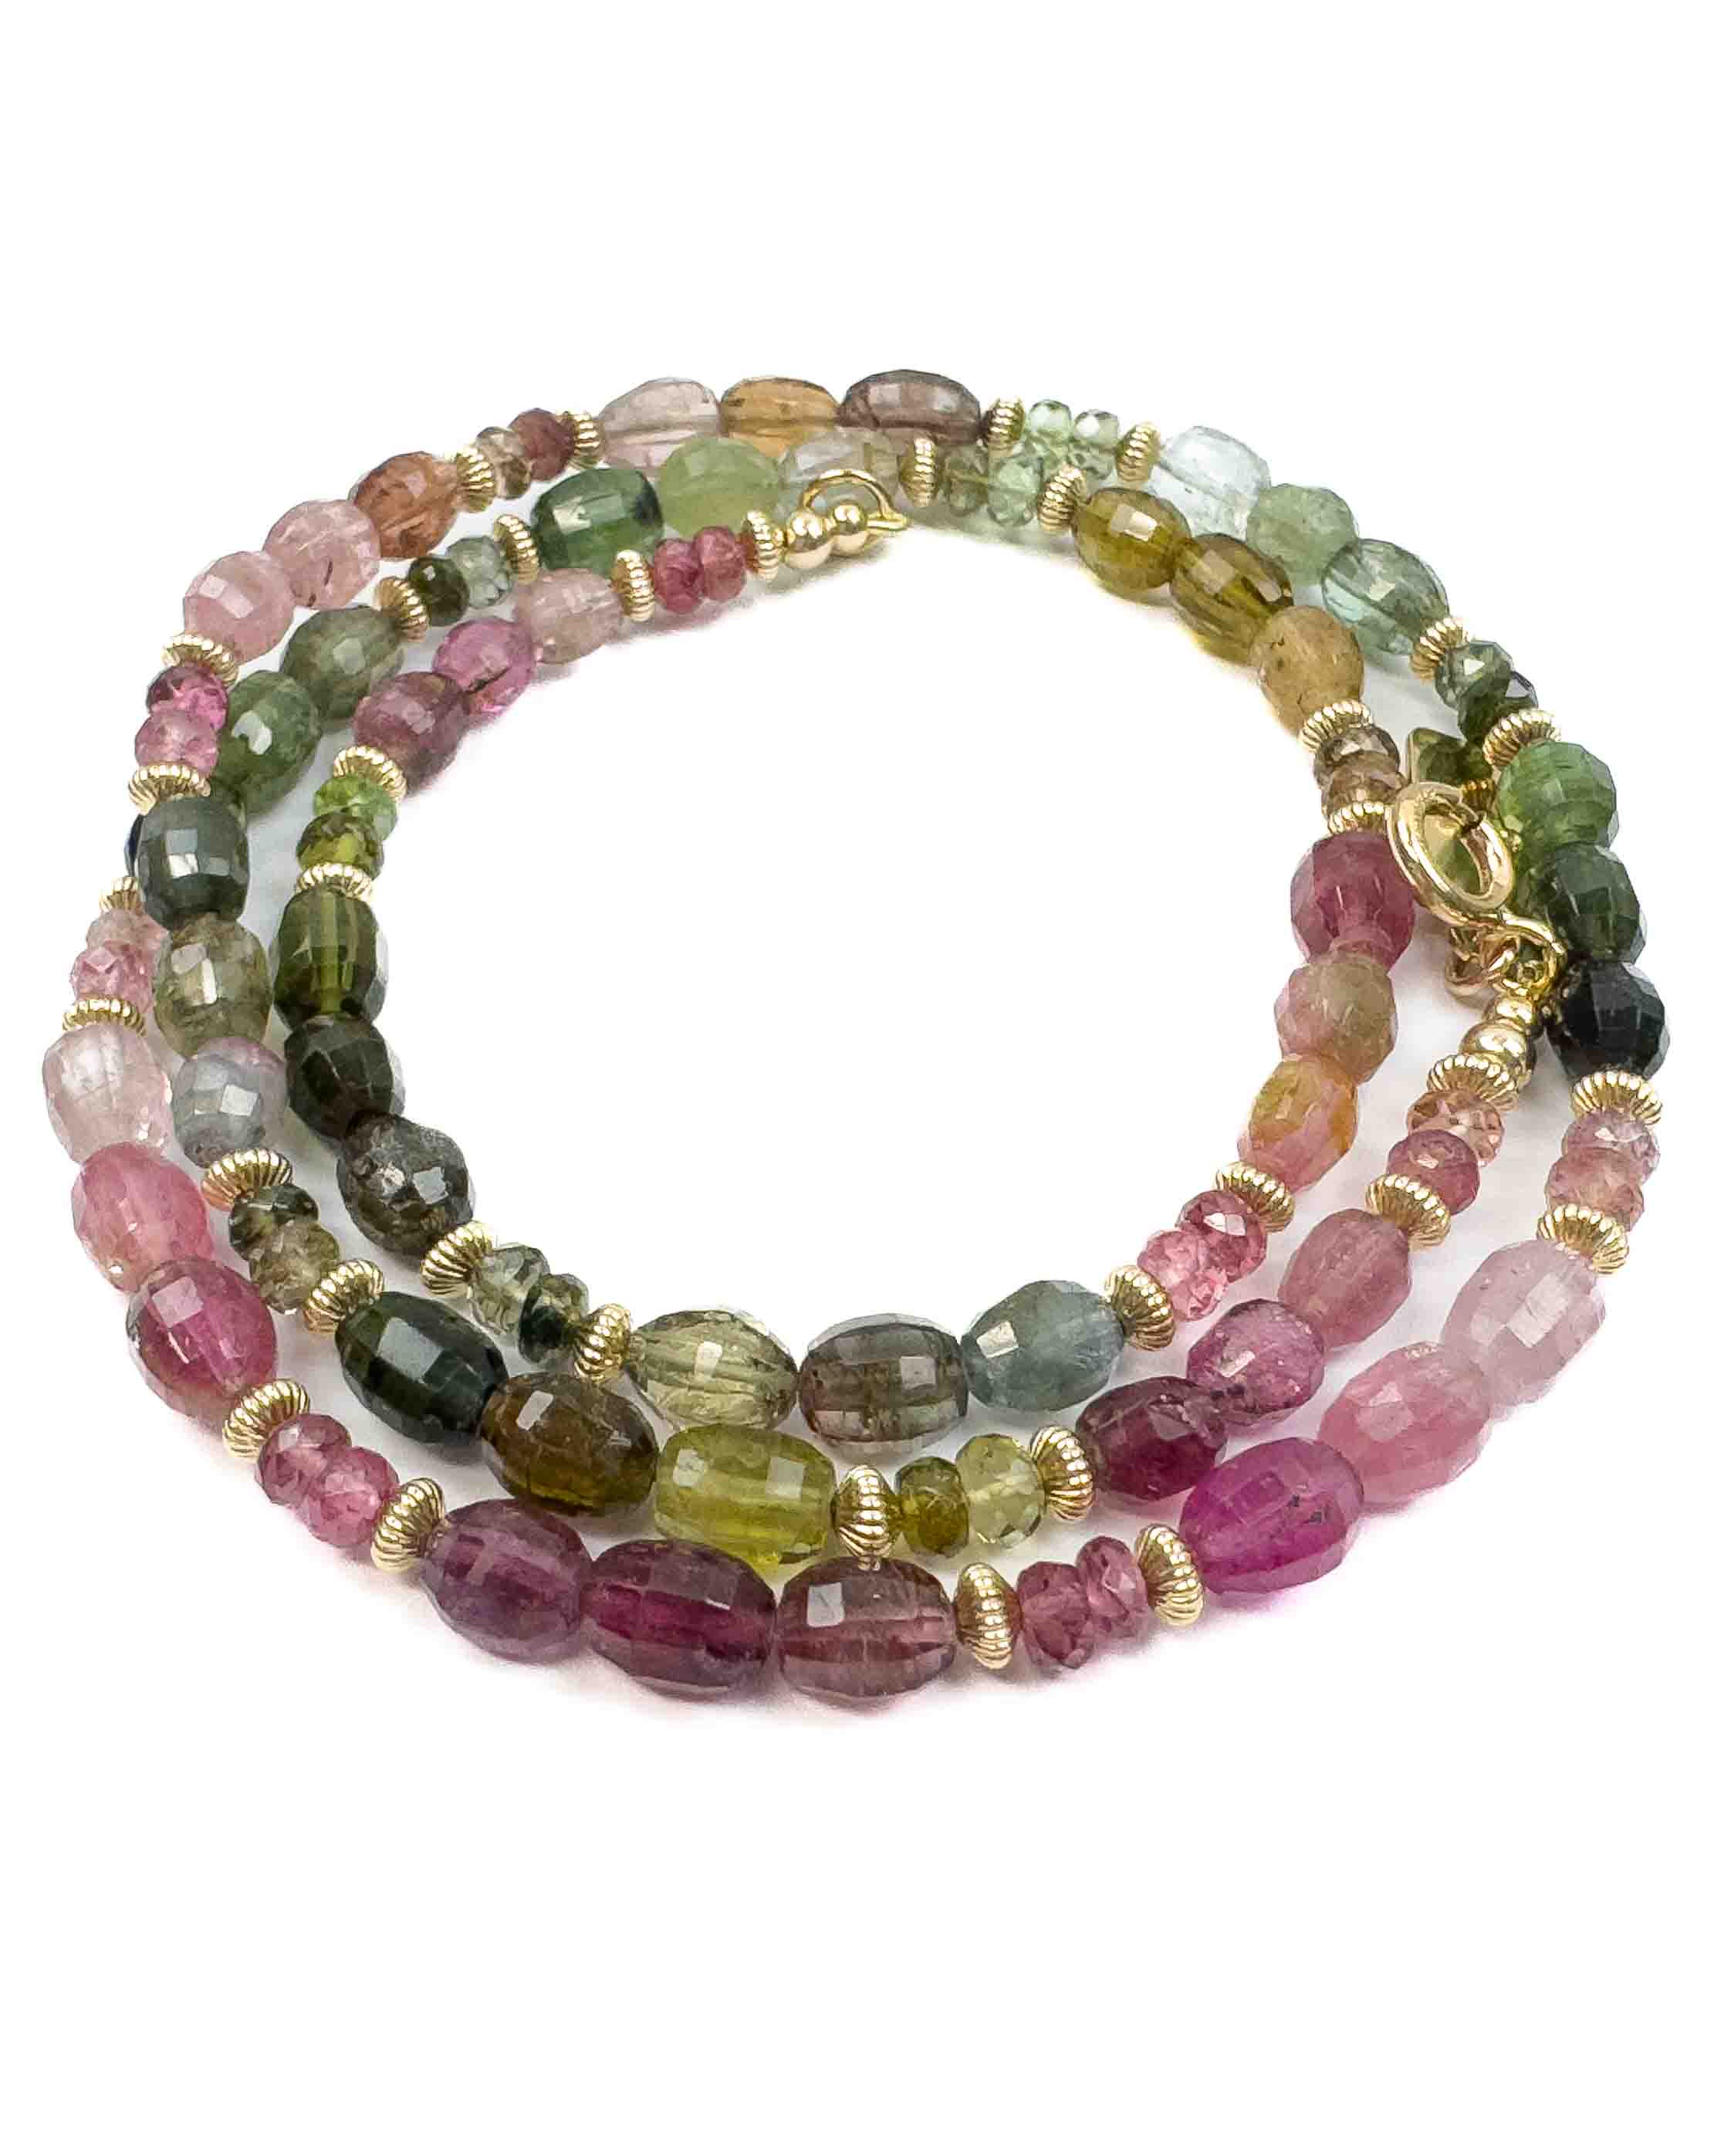 Faceted Watermelon Tourmaline Strand Necklace